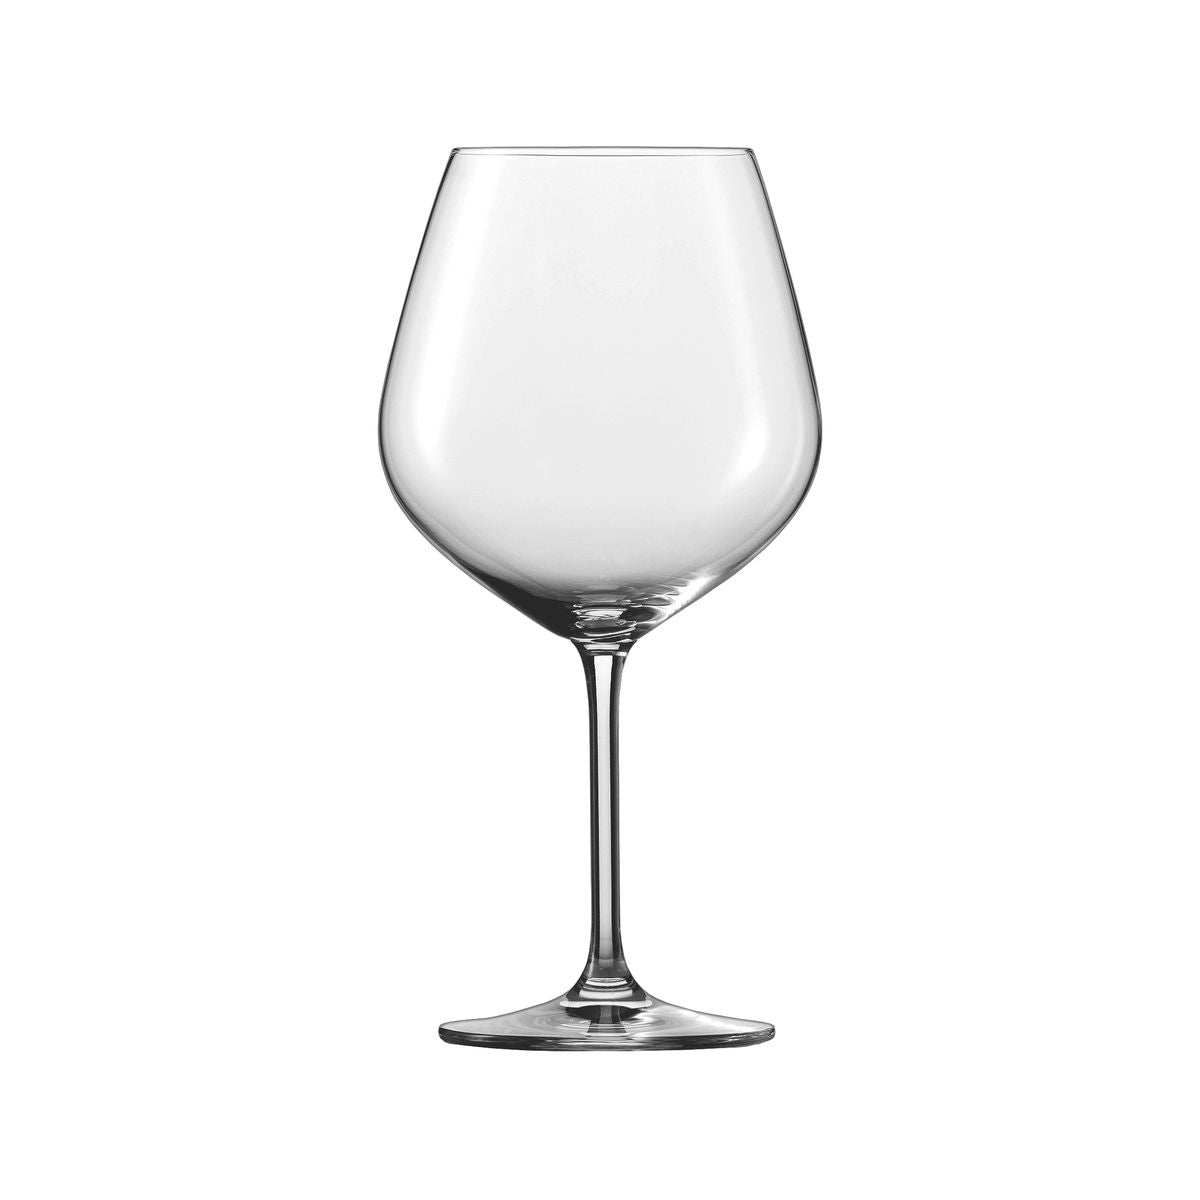 Burgundy/Claret Glass - 750ml, Vina from Schott Zwiesel. made out of Glass and sold in boxes of 6. Hospitality quality at wholesale price with The Flying Fork! 